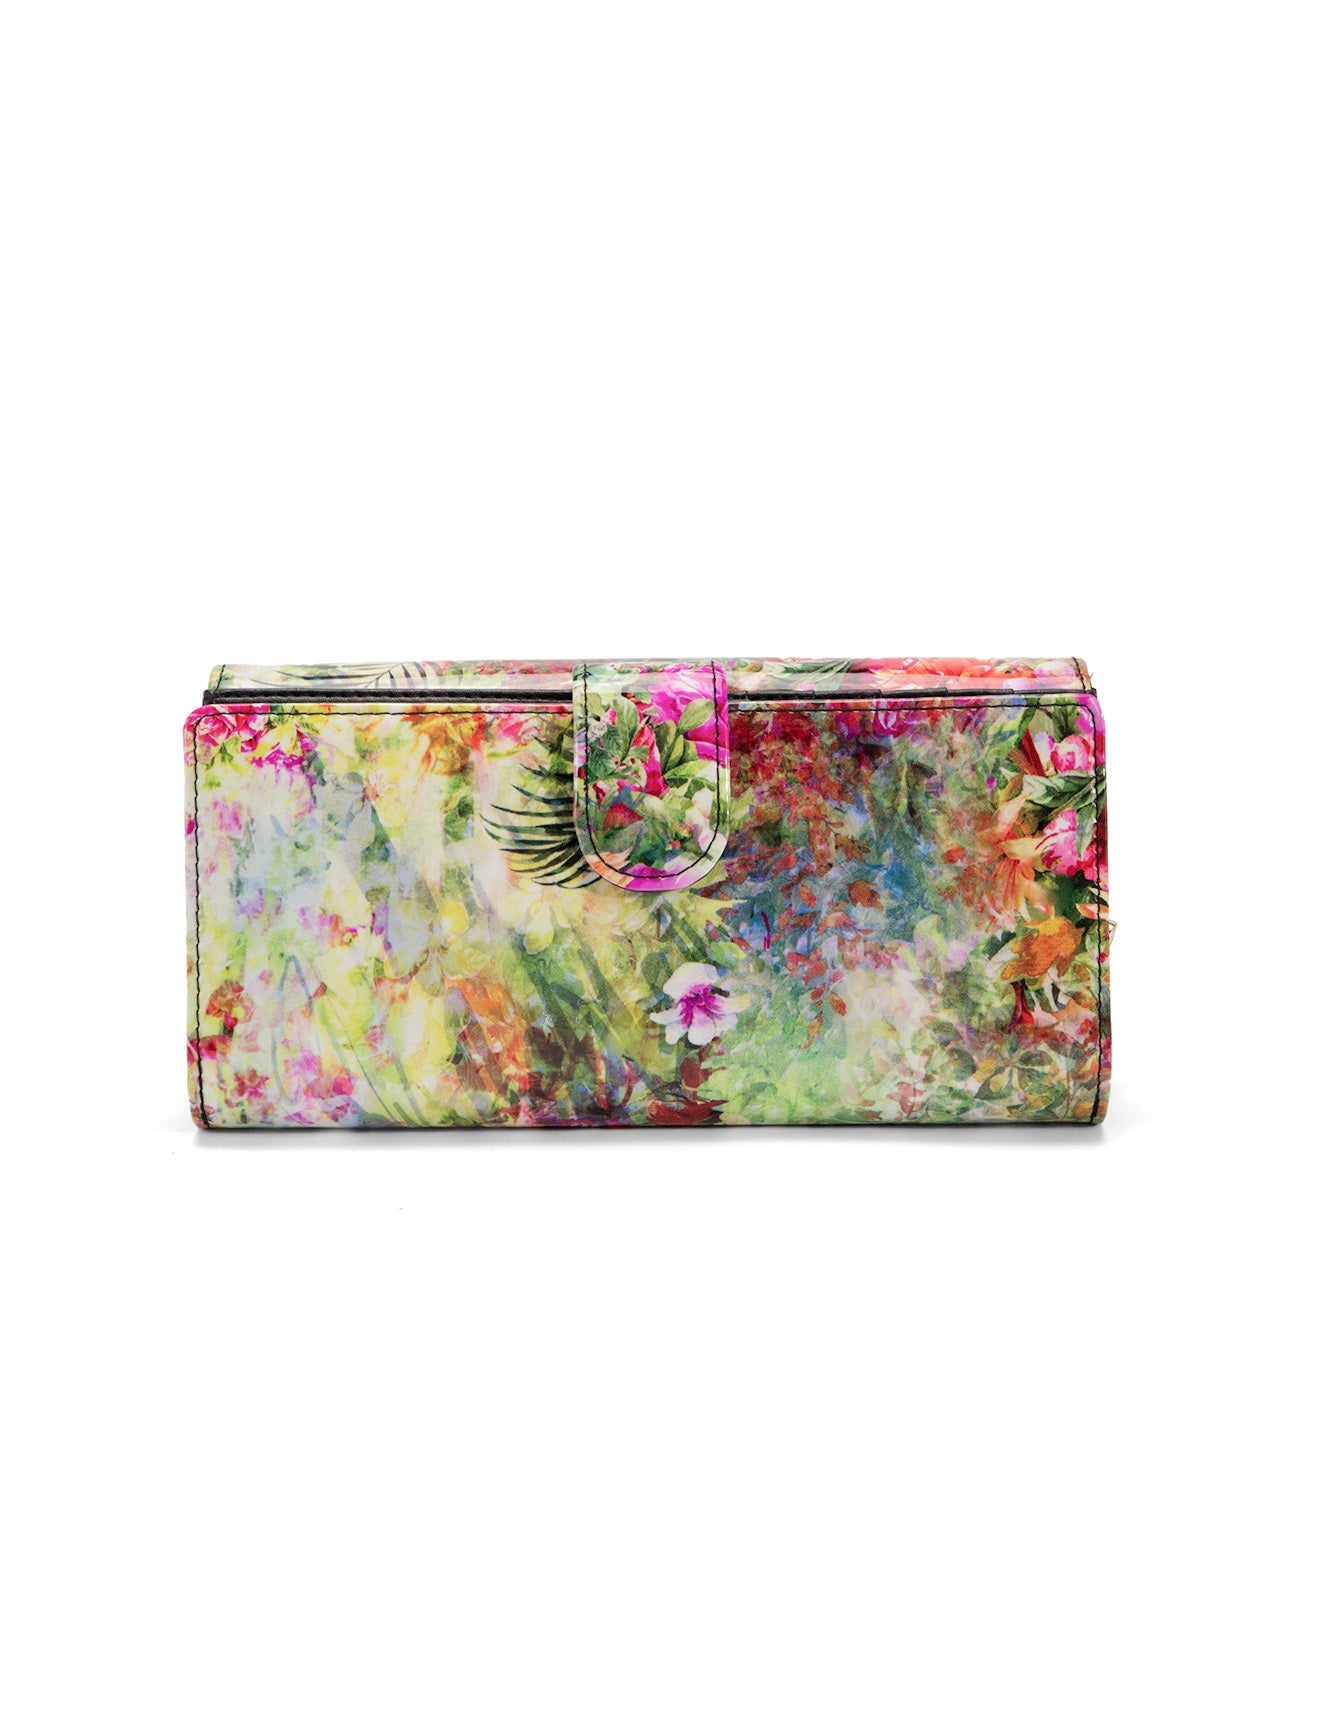 Serenade - WSN8101 Fiore Large Wallet - Floral-2